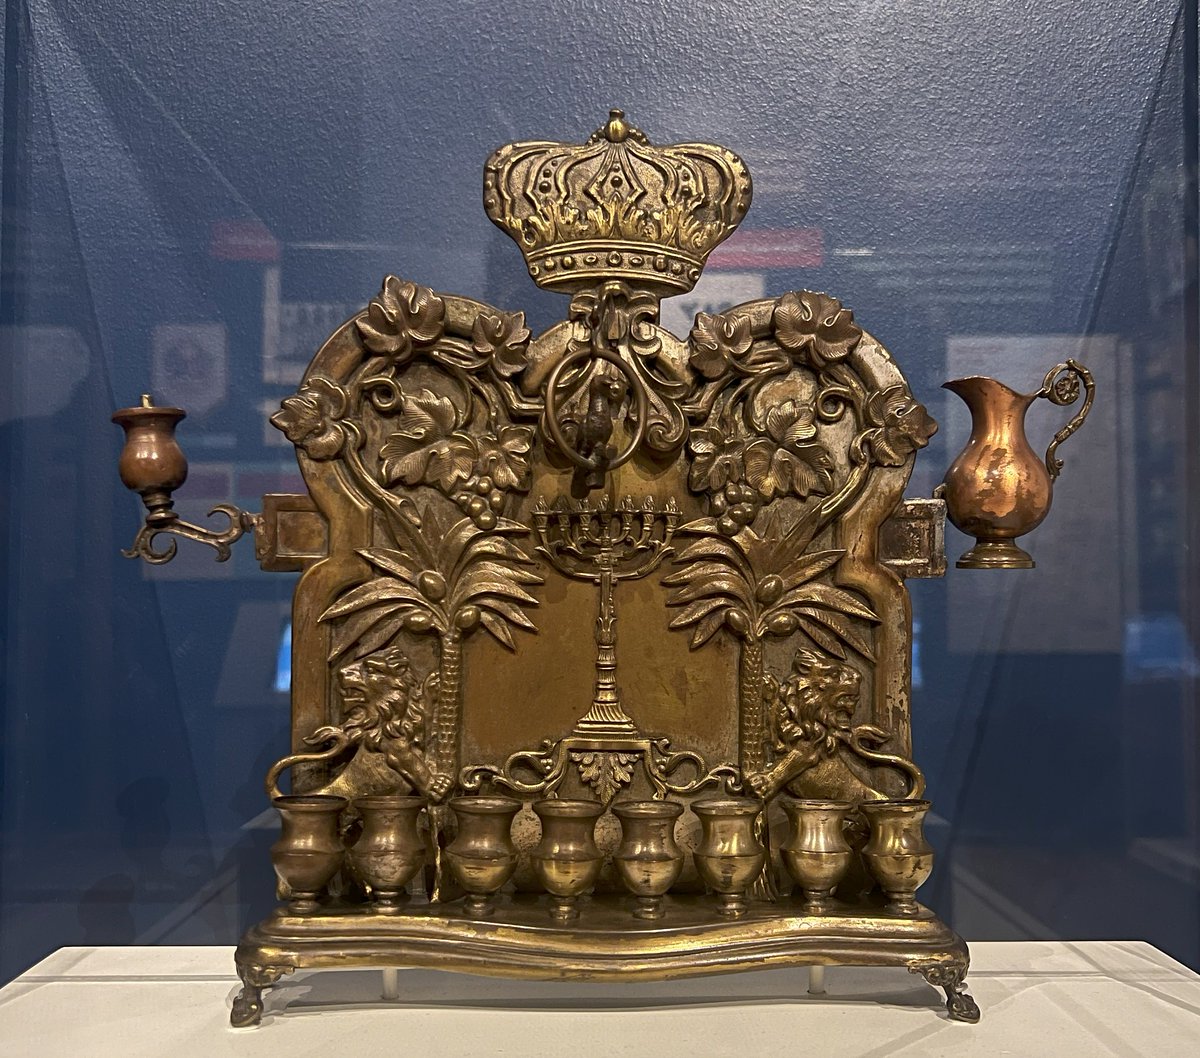 Happy Hanukkah!🕎 This hanukkiah was made in Poland c. 1900 & used by the Sol & Bertha Leaf family. Its style, which represents the biblical Garden of Eden, was popular at this time & features palm trees, grape leaves, & animals. Learn more in #BackHomeCHM ow.ly/5WlT50Qgsa8